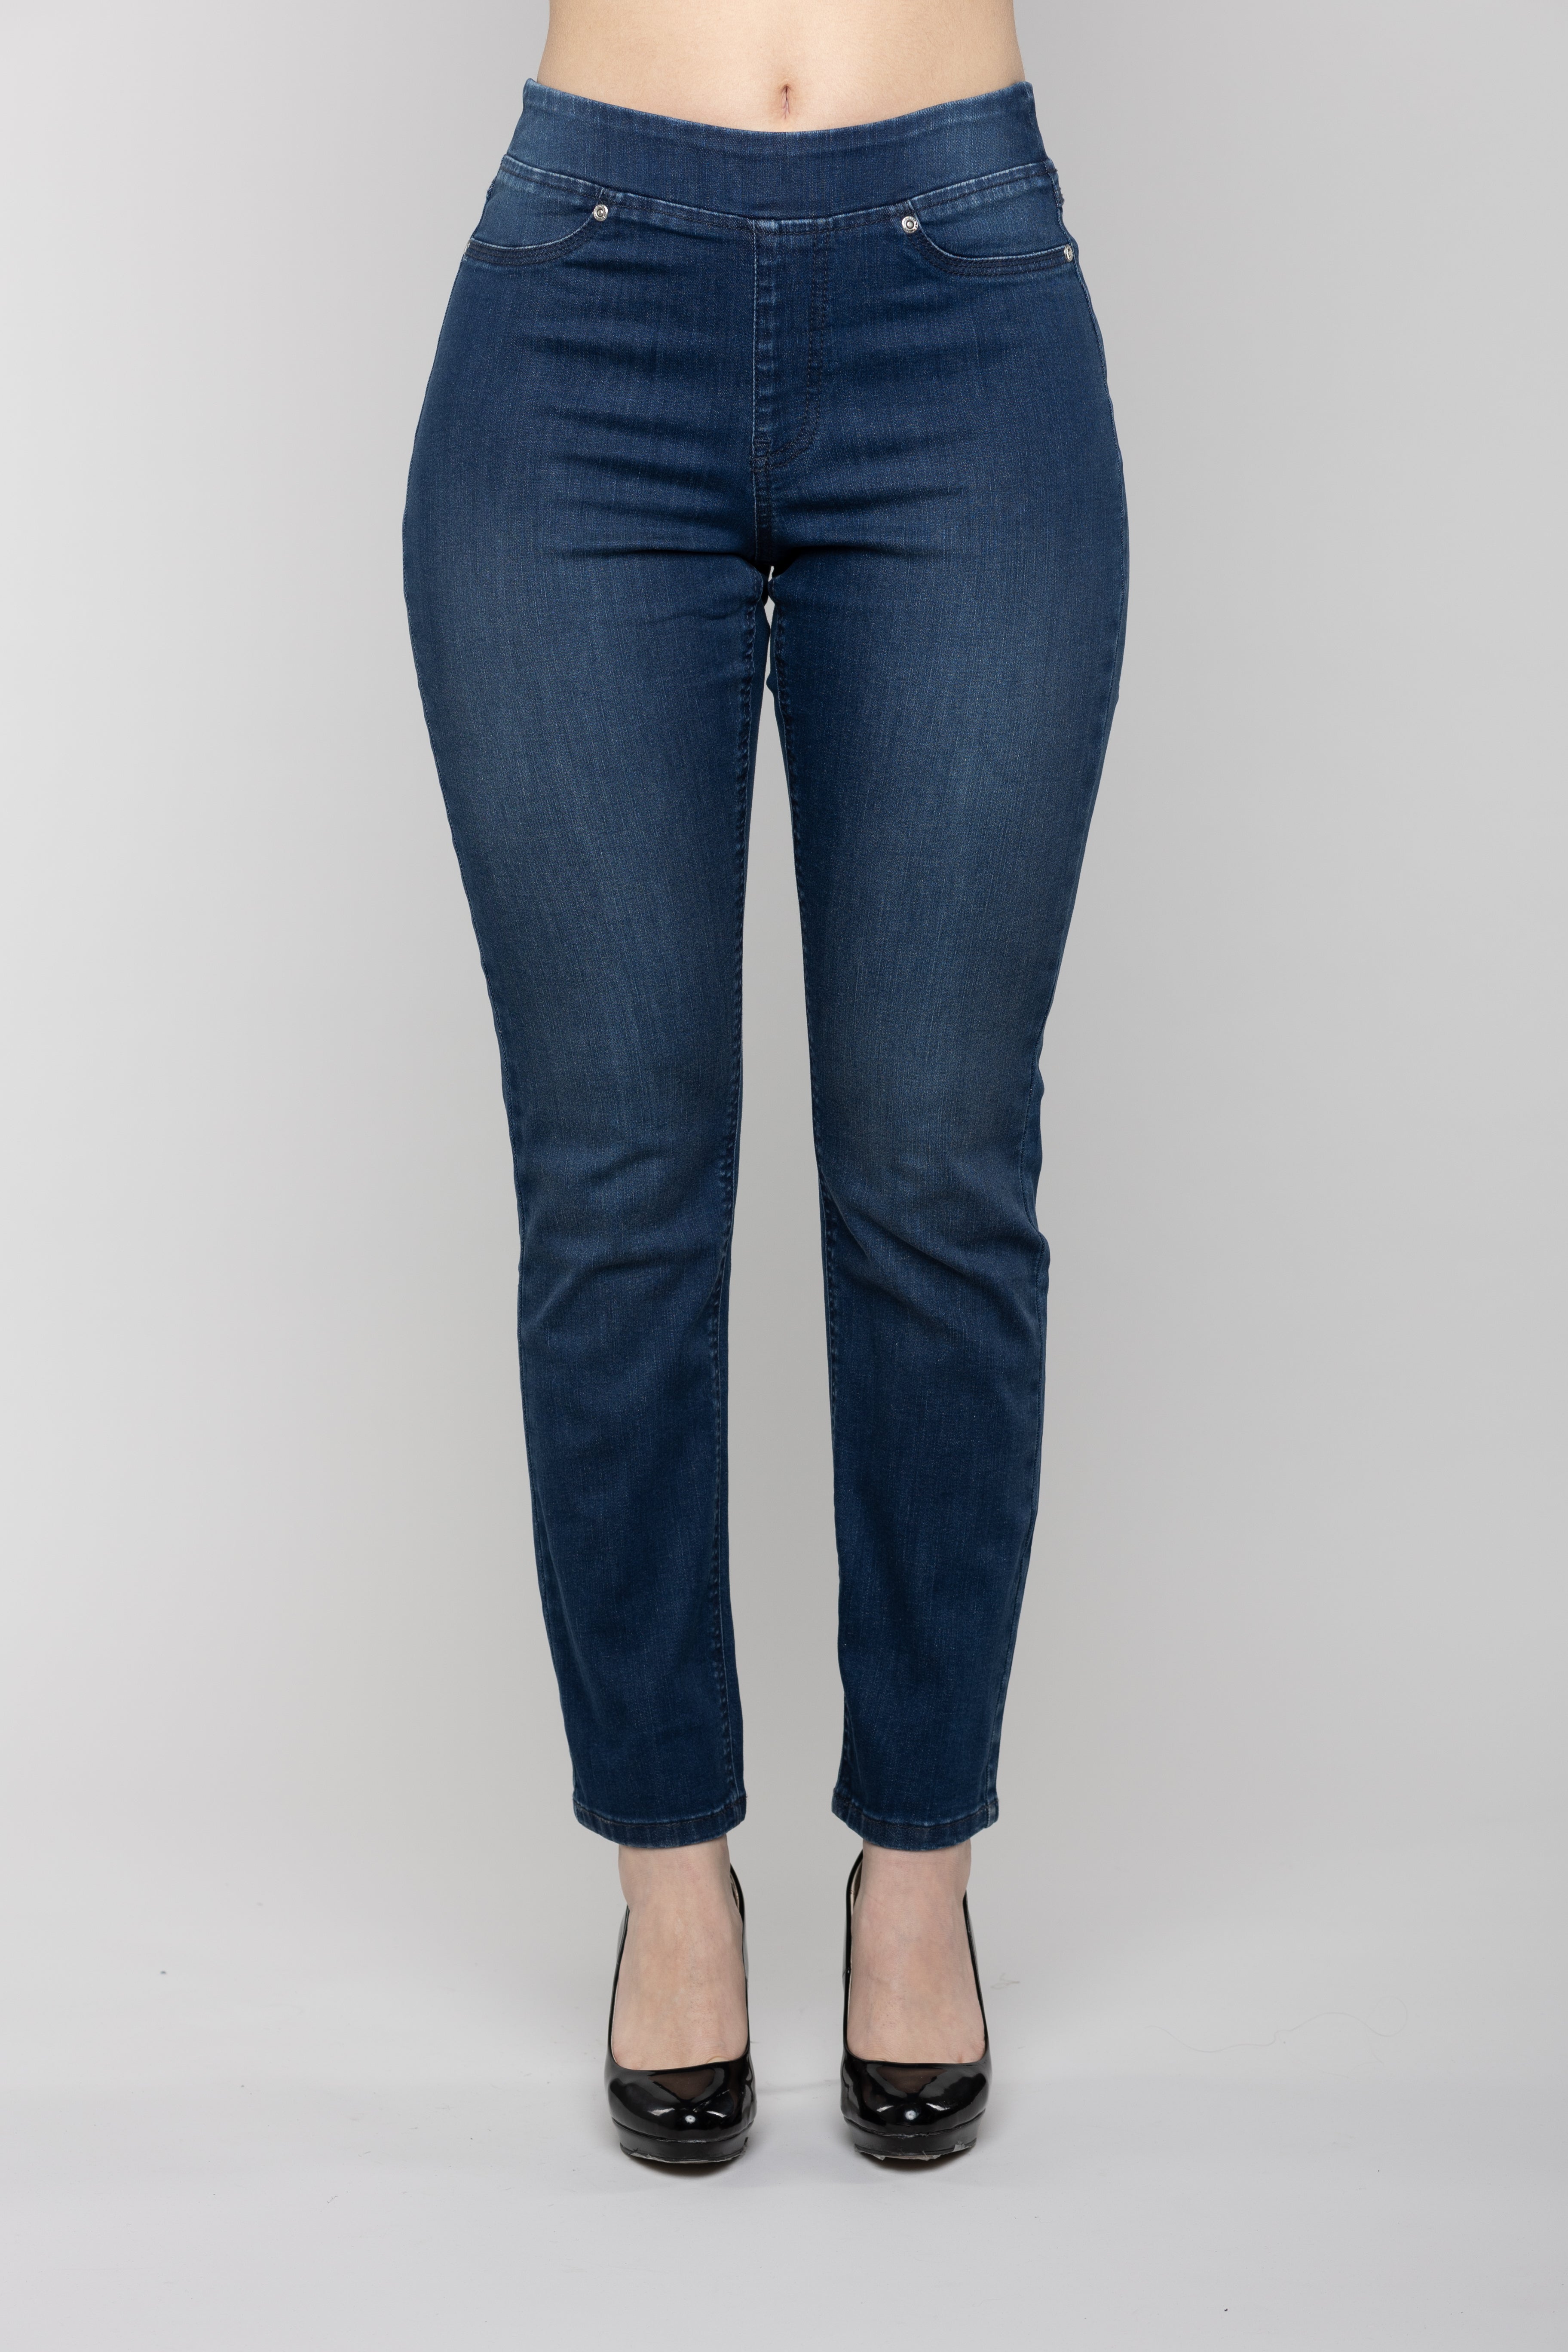 Carreli Jeans® | Angela Fit Straight Leg Pull-On in Blue Black Wash